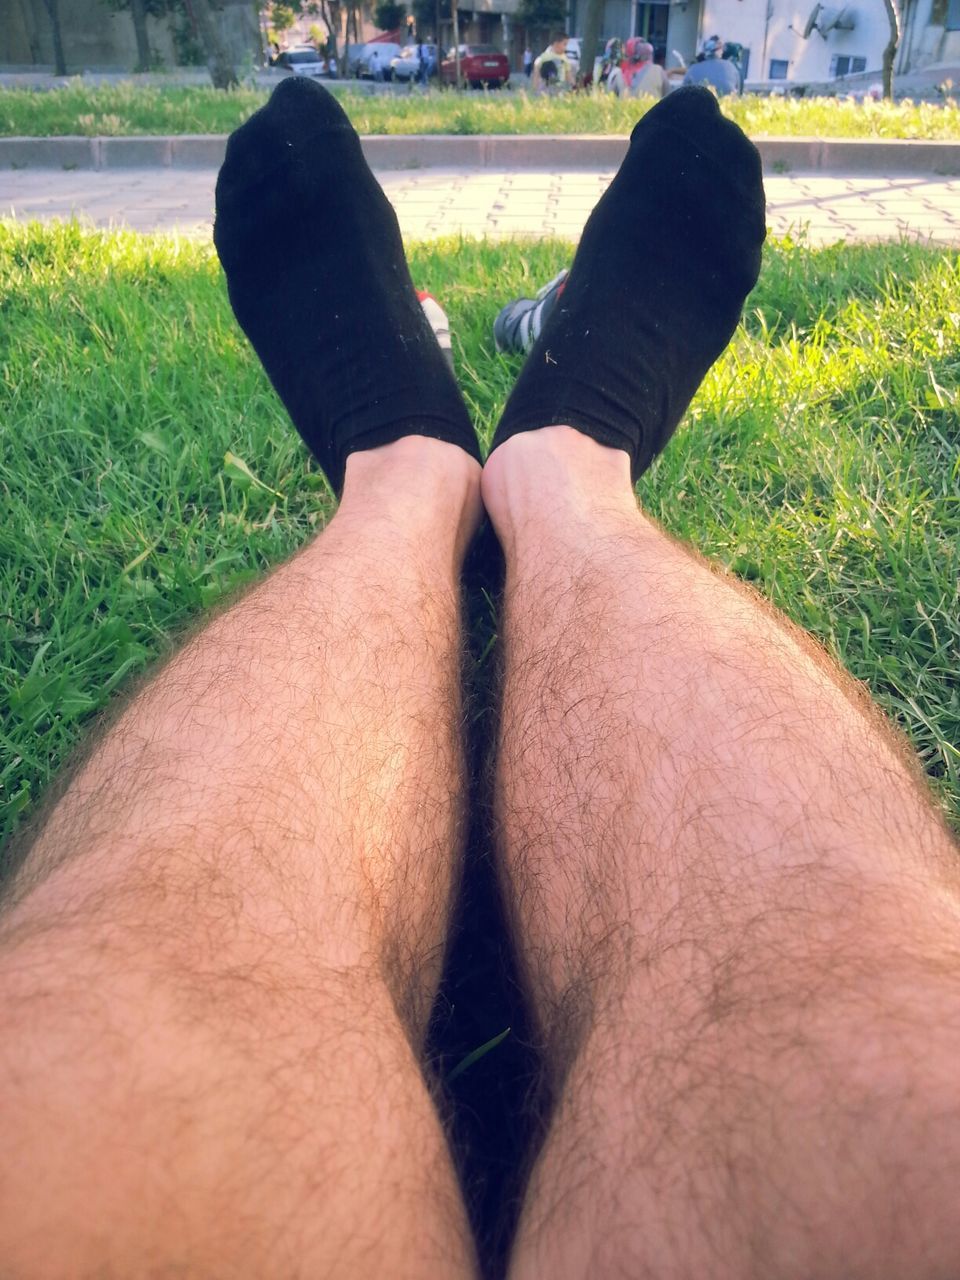 low section, grass, person, lifestyles, personal perspective, leisure activity, field, unrecognizable person, men, shoe, part of, human foot, relaxation, day, grassy